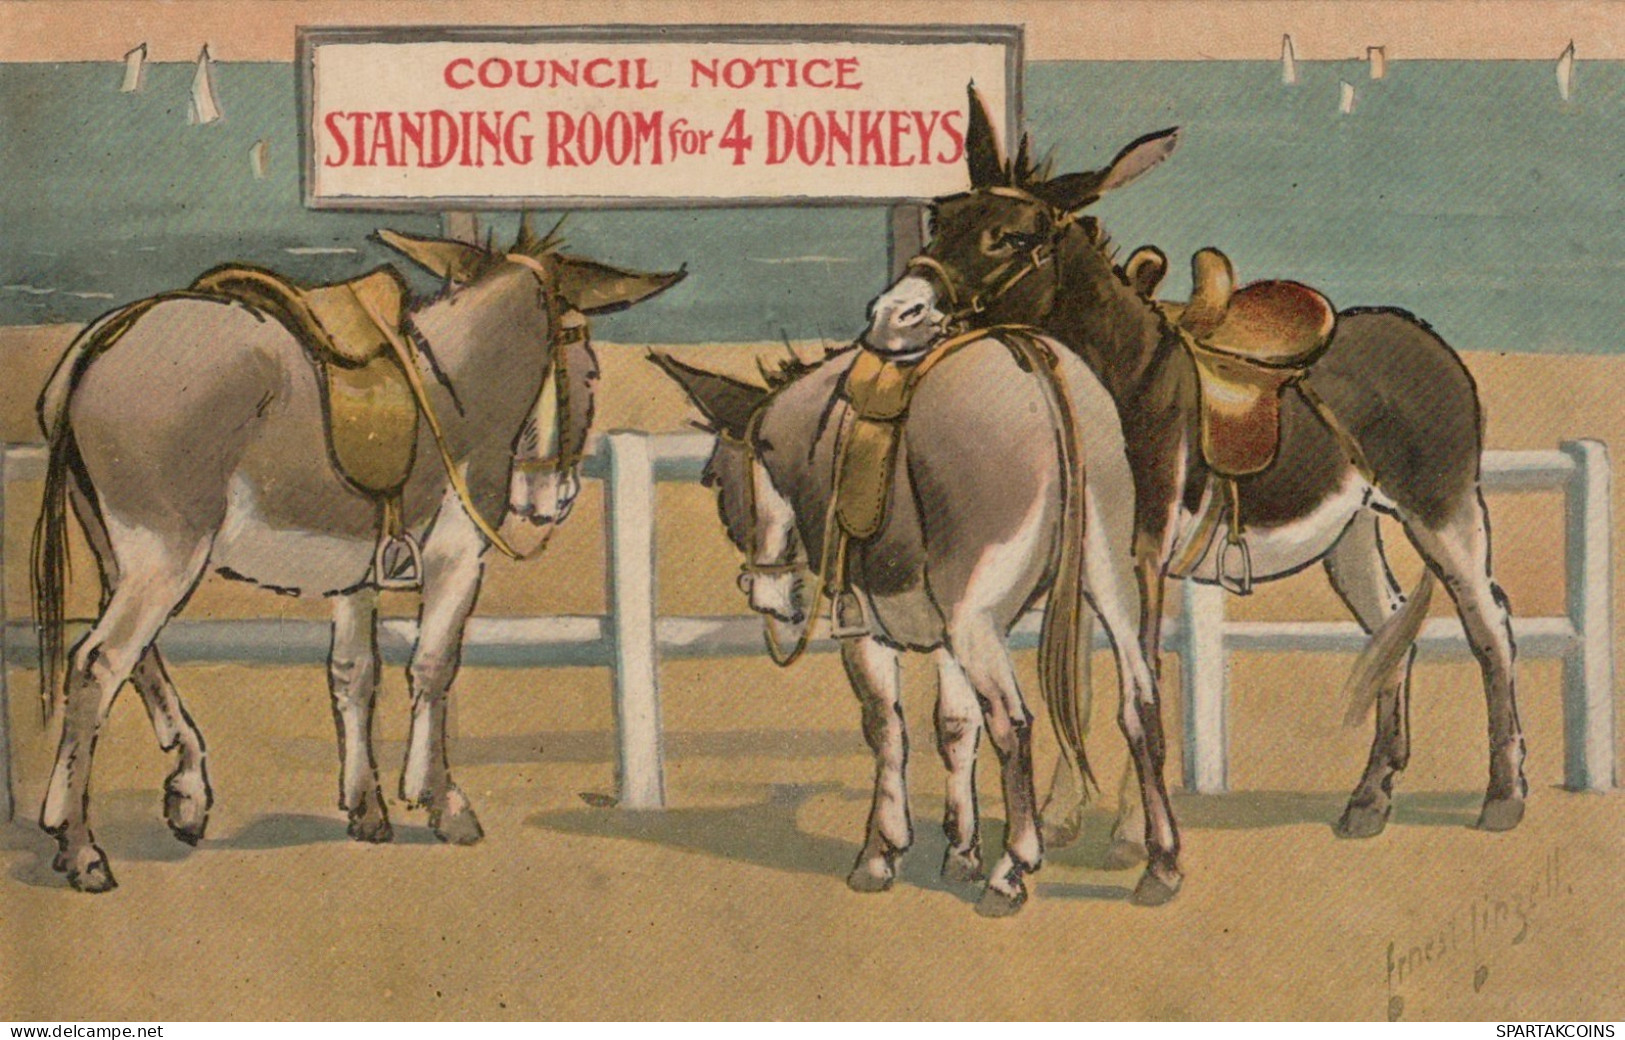 DONKEY Animals Vintage Antique Old CPA Postcard #PAA305.A - Donkeys